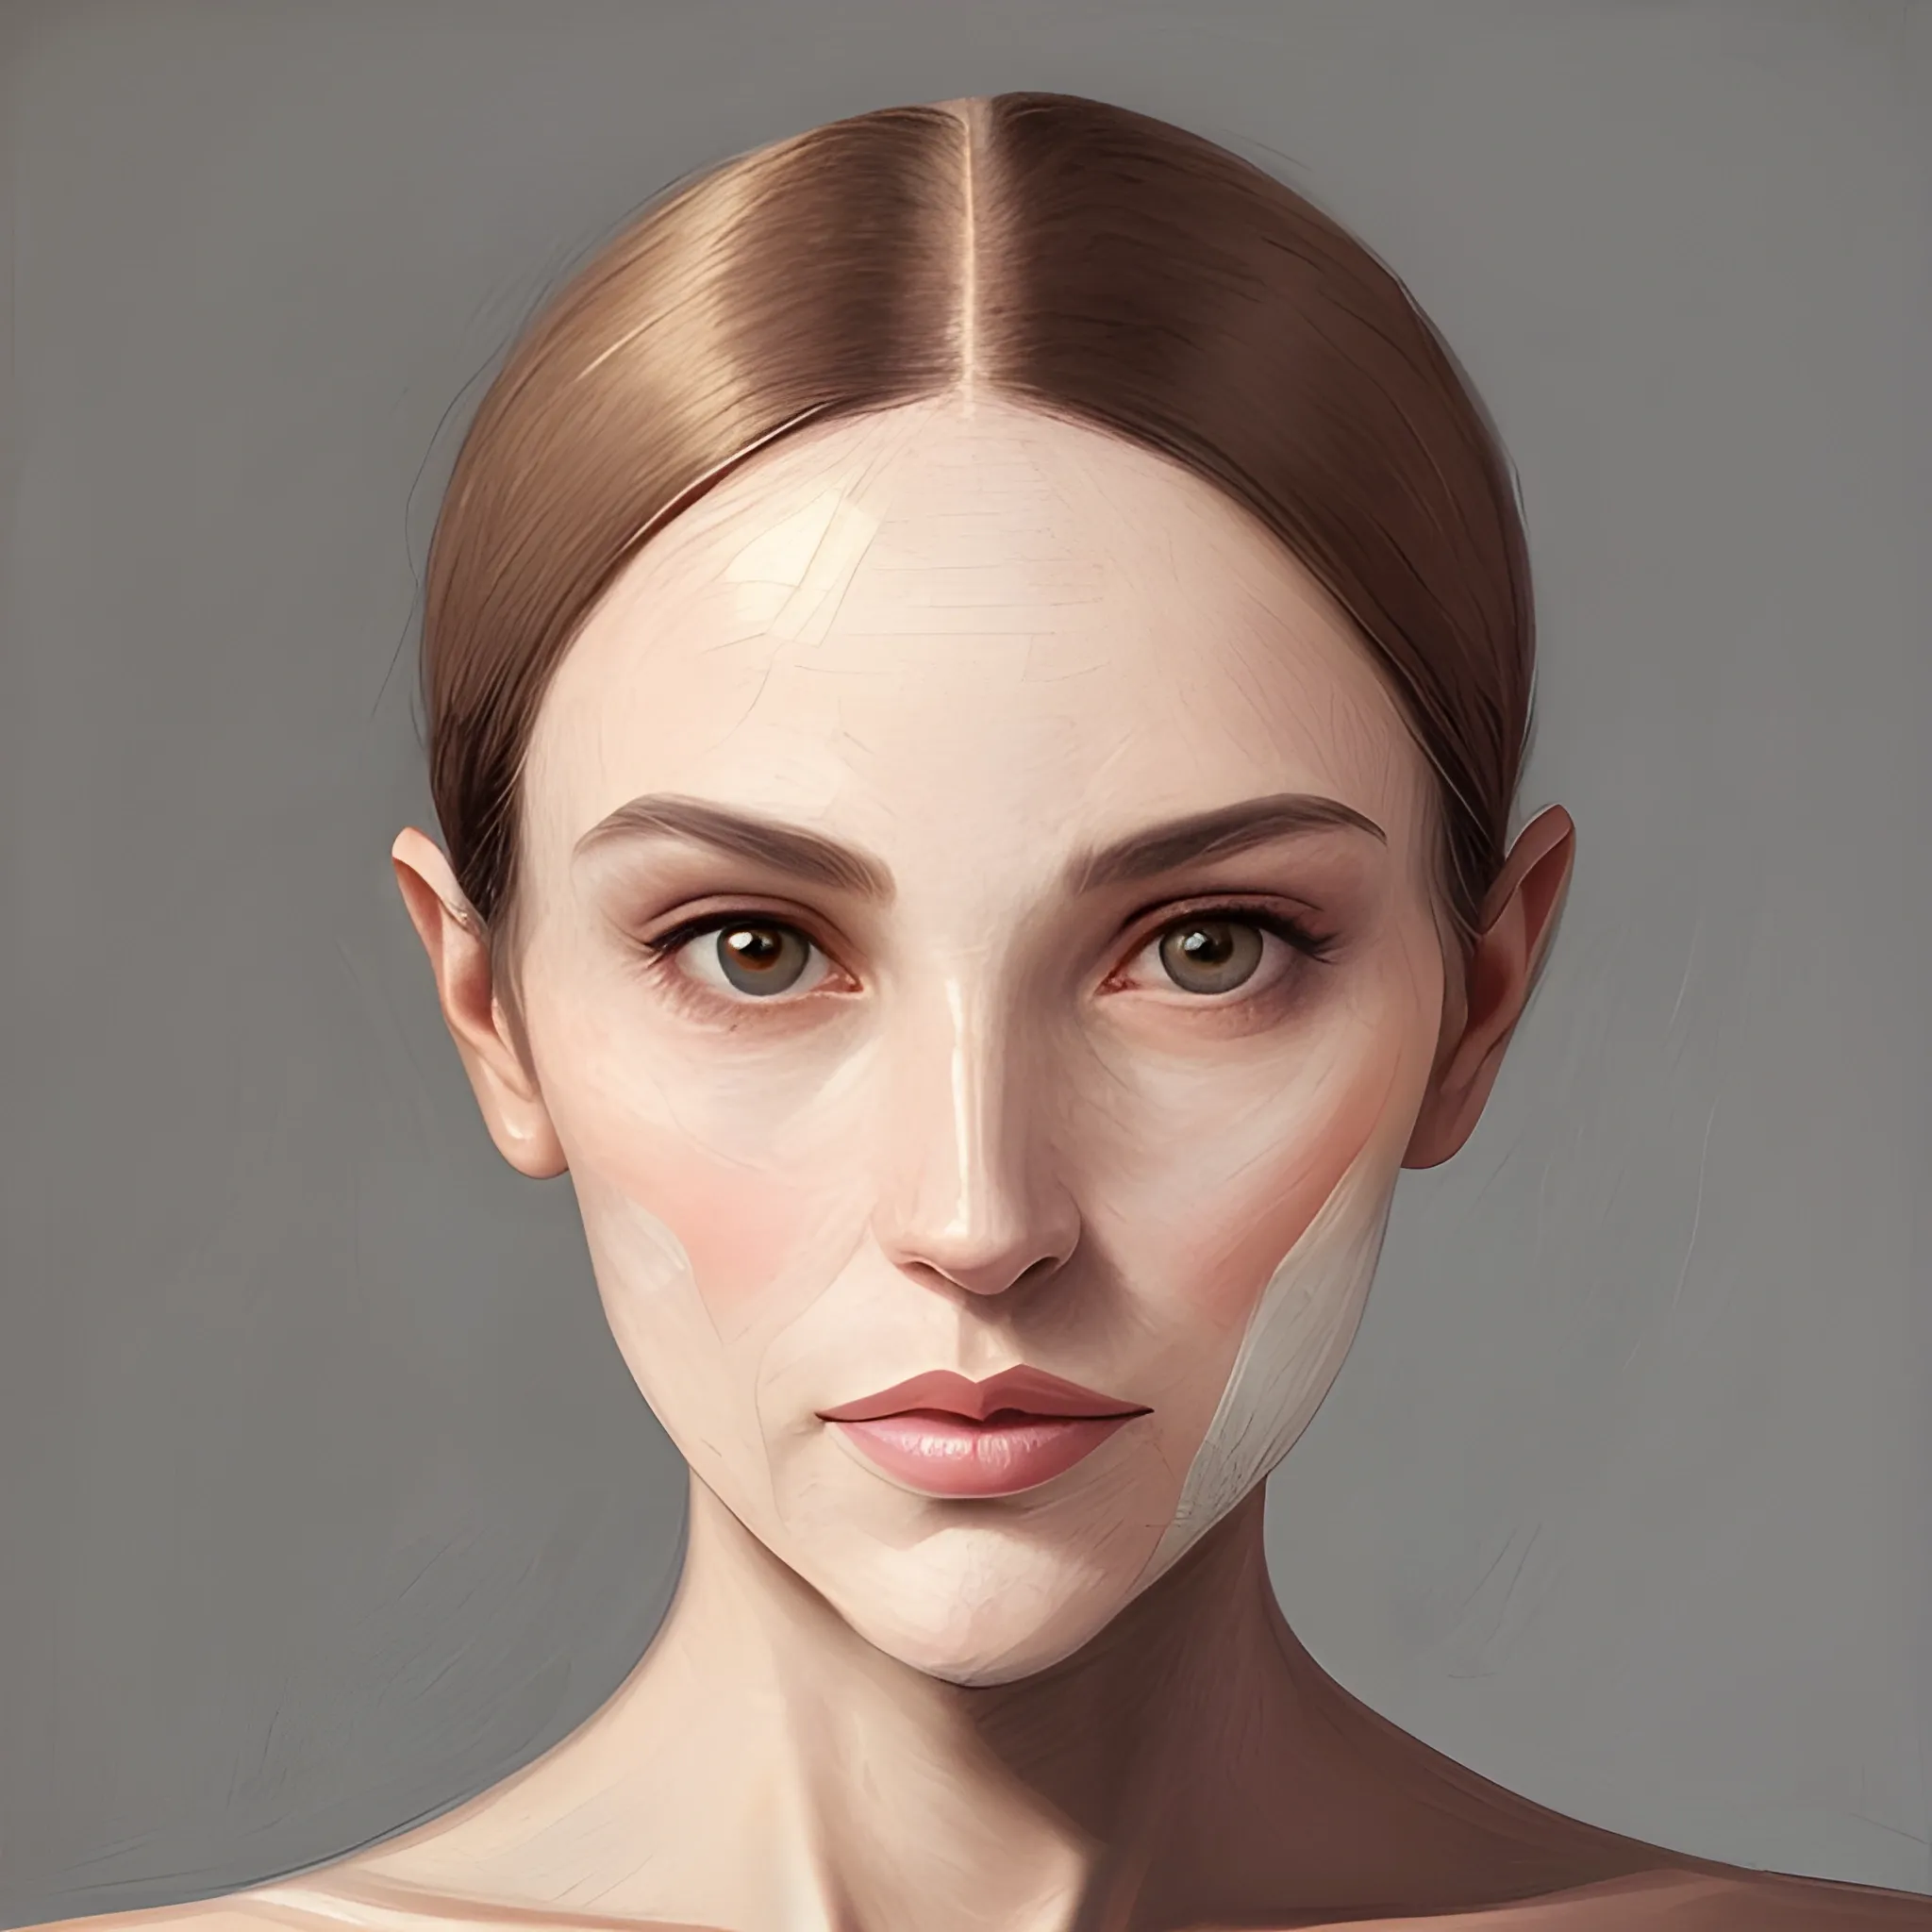 A portrait of a woman with soft yet defined facial features, including slightly angular cheeksbones and a square jawline that give her face a balanced look.